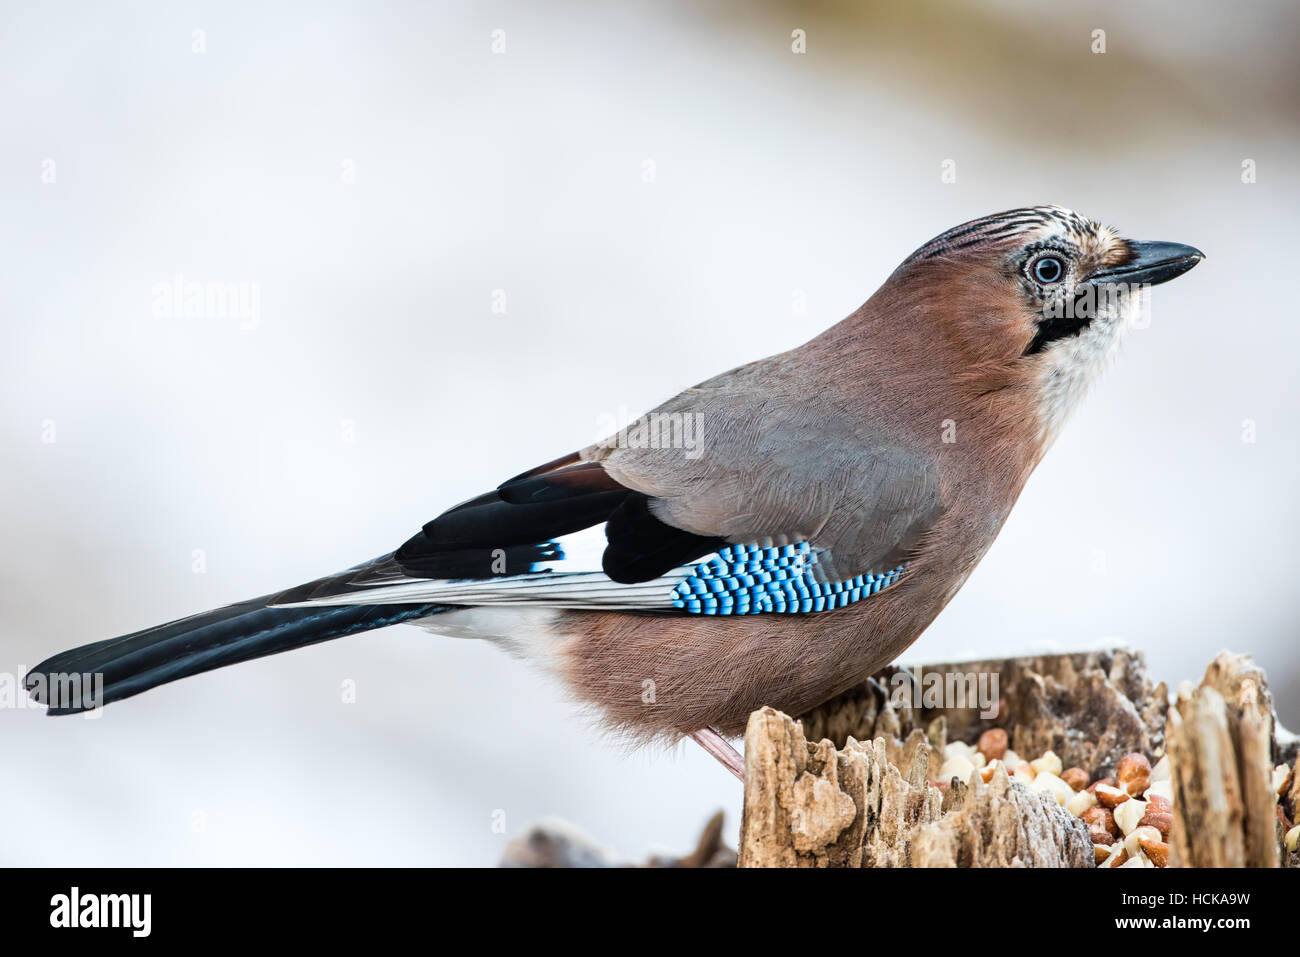 The whole Jay (garrulus glandarius) in profile on the stump with a snowy background Stock Photo